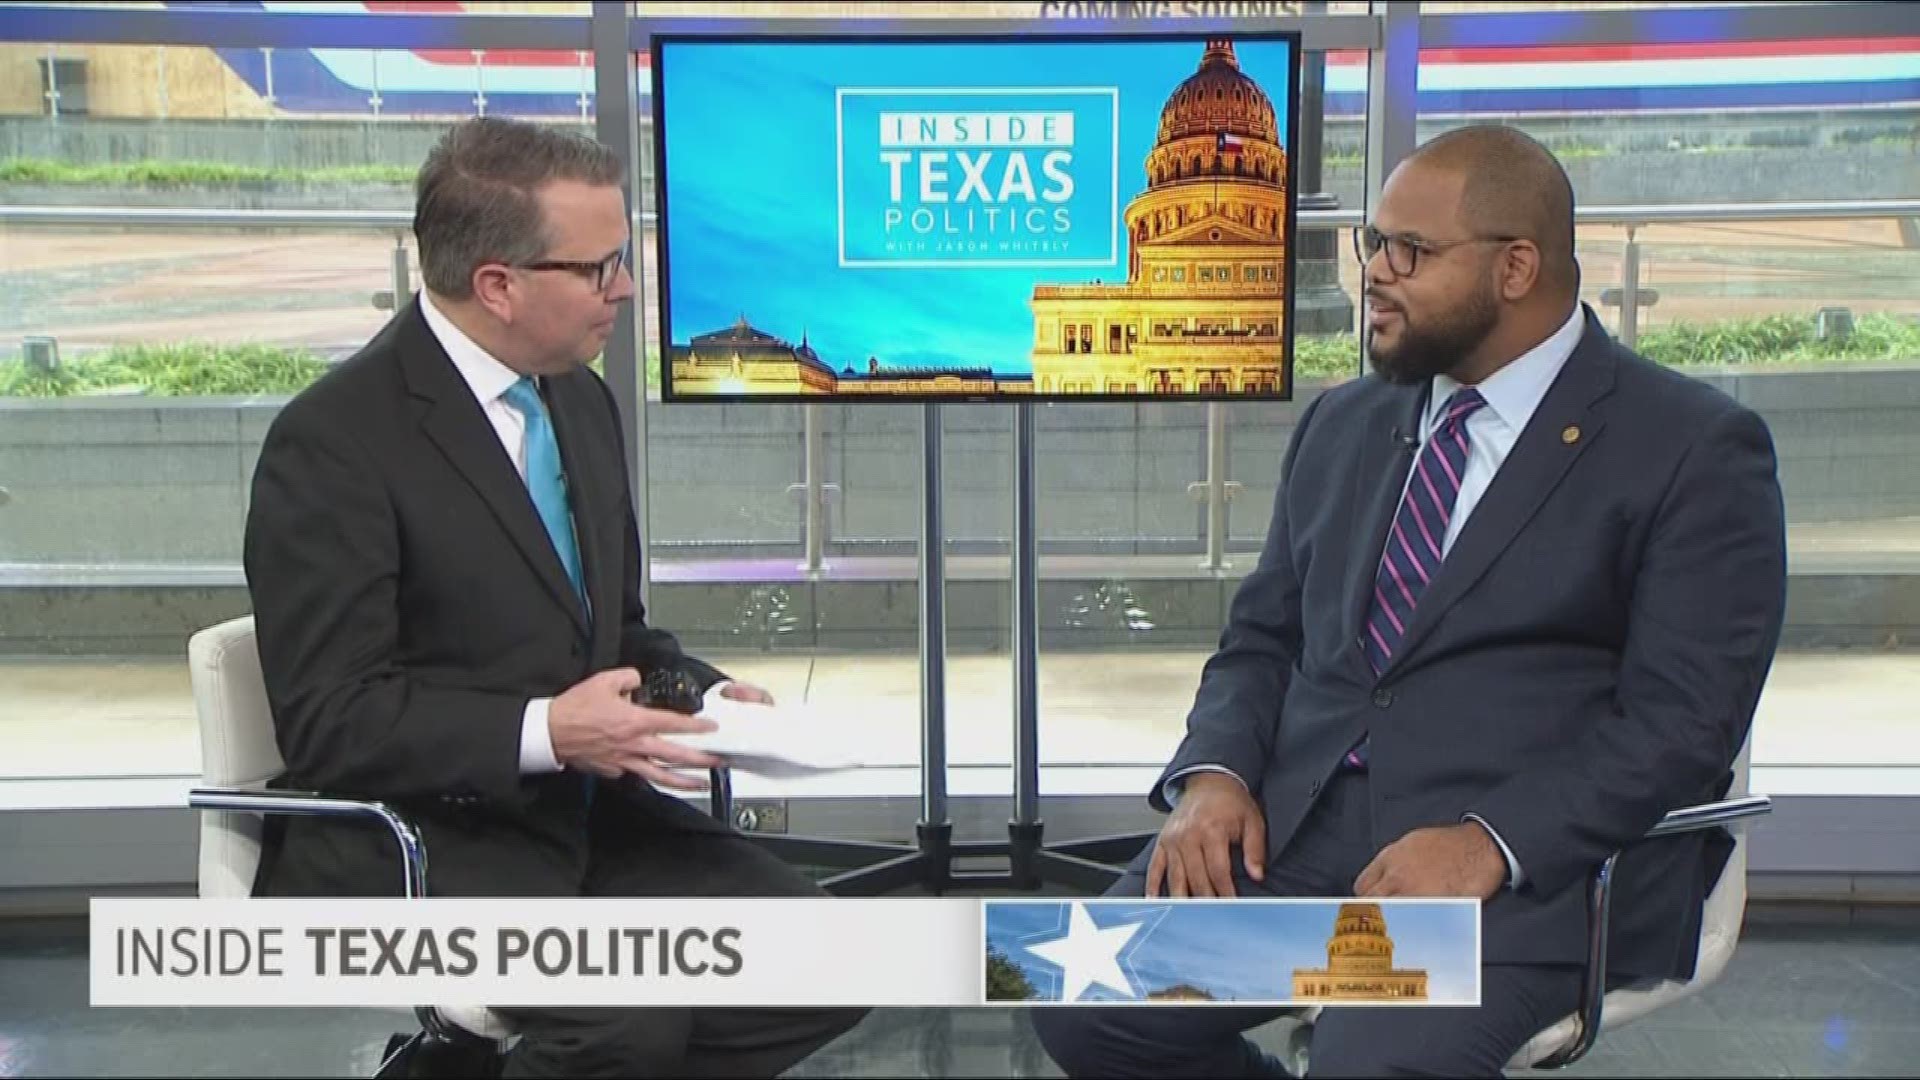 Democratic State Representative Eric Johnson (Dist. 100). Rep. Johnson joined host Jason Whitely to discuss the removal of the Confederate plaque on the wall in the state capitol